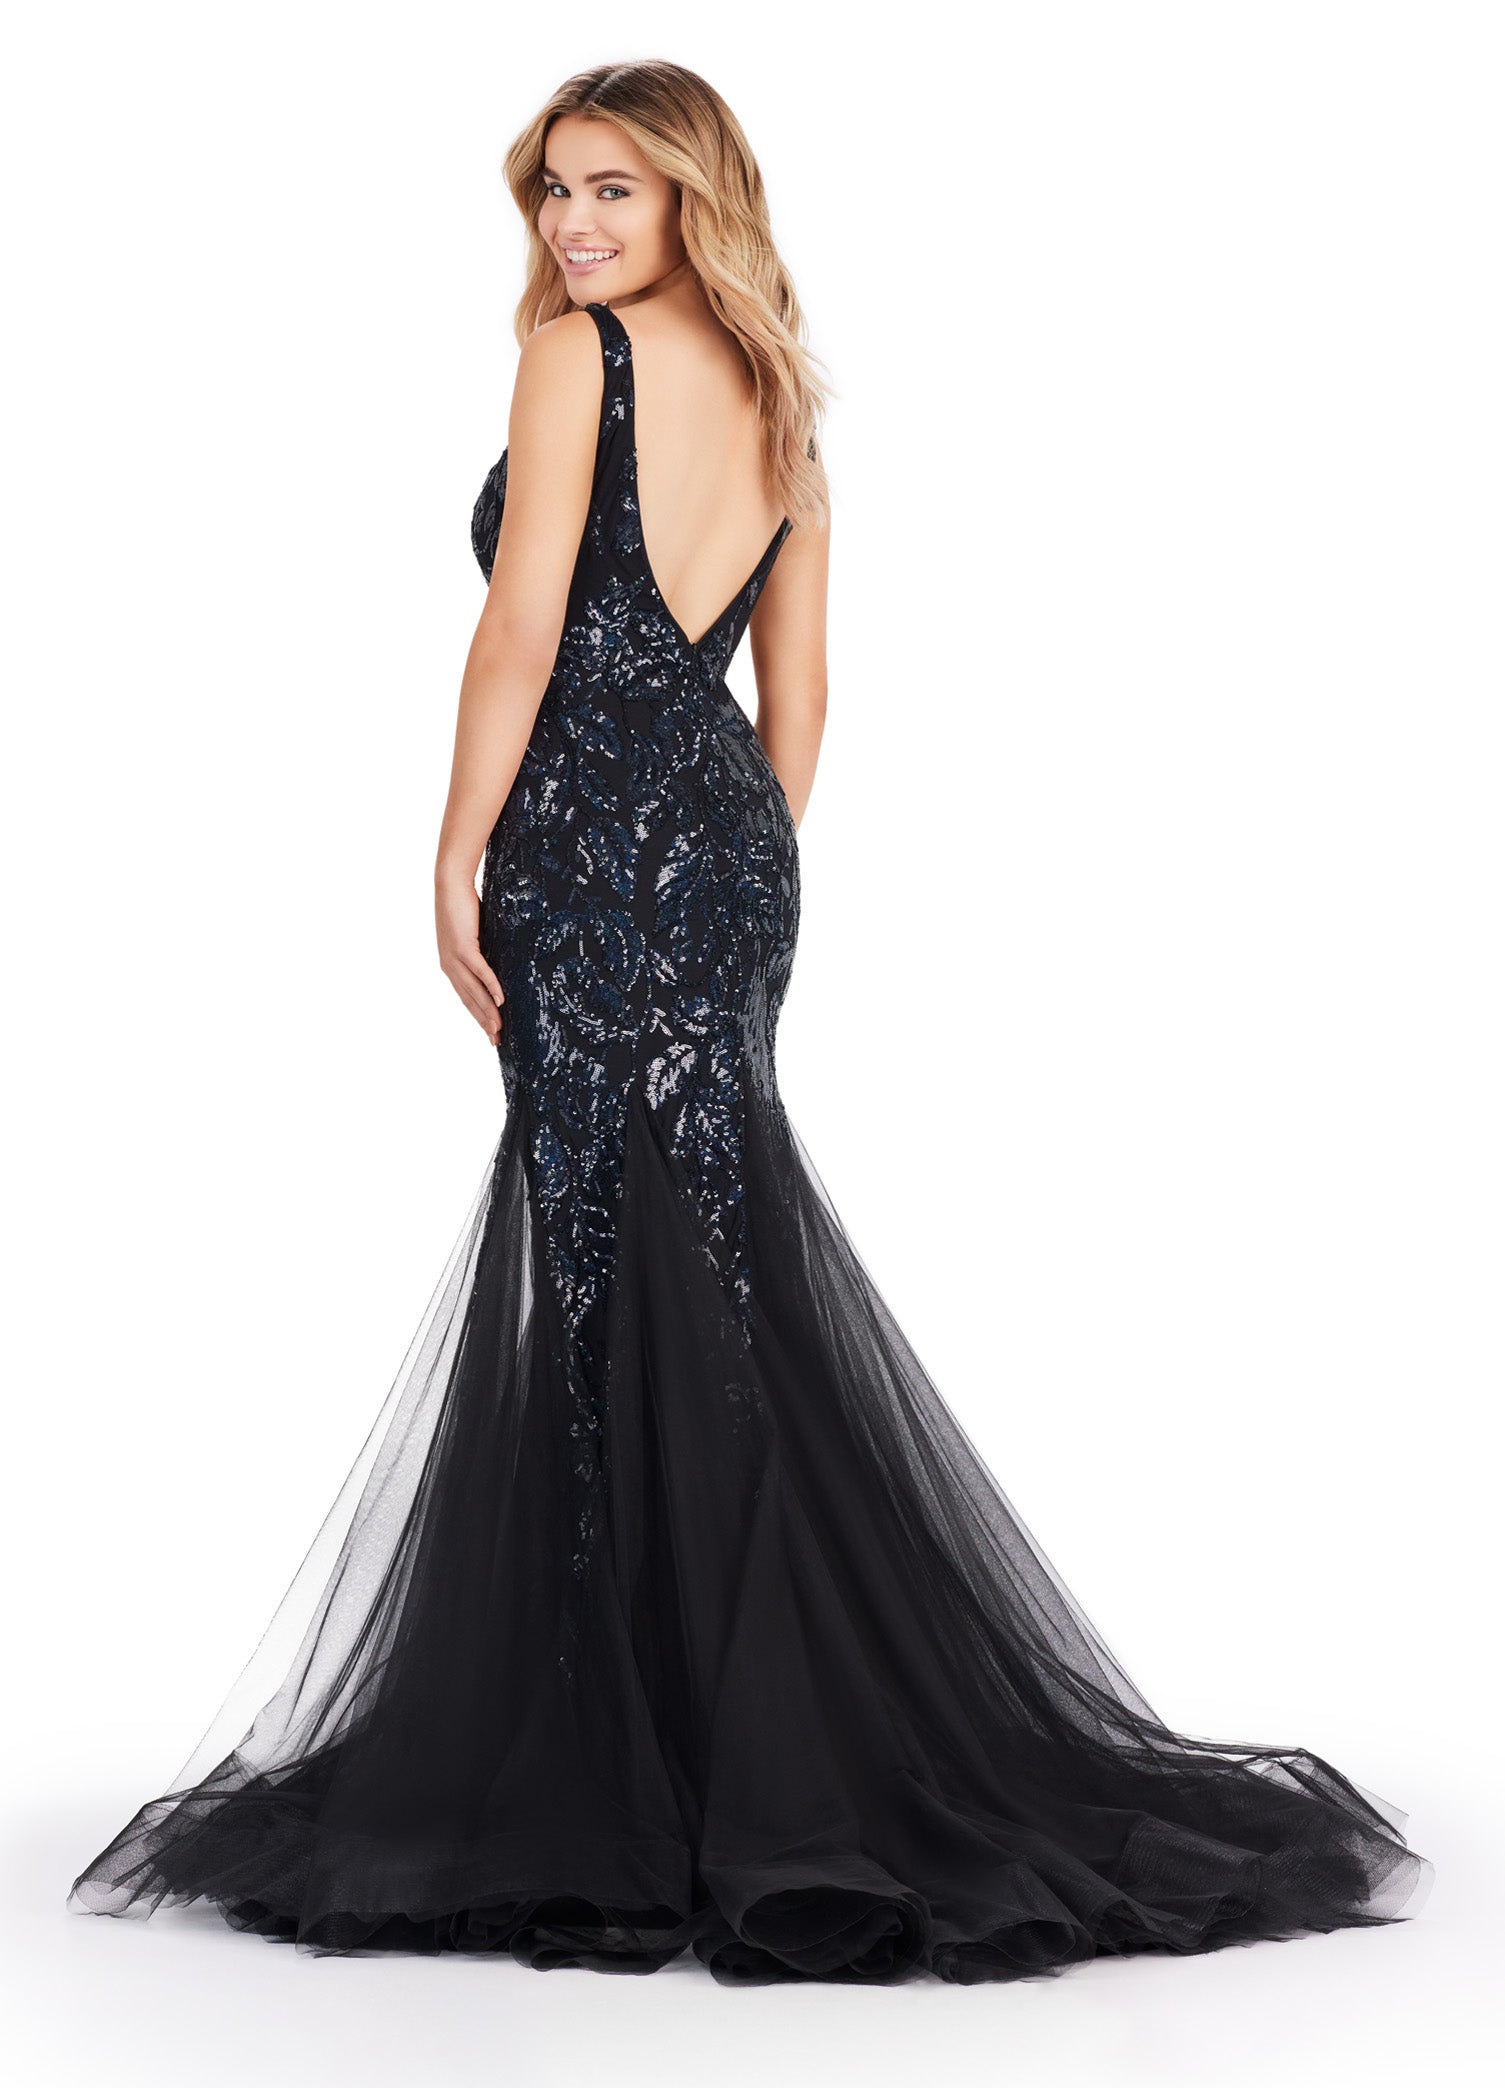 Get ready to command attention in the Ashley Lauren 11472 Long Prom Dress. With a stunning V-neck, sequin embellishments, and a mermaid skirt made with stretchy fabric, this gown is designed to enhance your figure and make you shine. Perfect for formal events, pageants, and more. Can you say iconic? This stretch sequin gown features a v-neckline and a pleated tulle skirt to help you slay your next event.